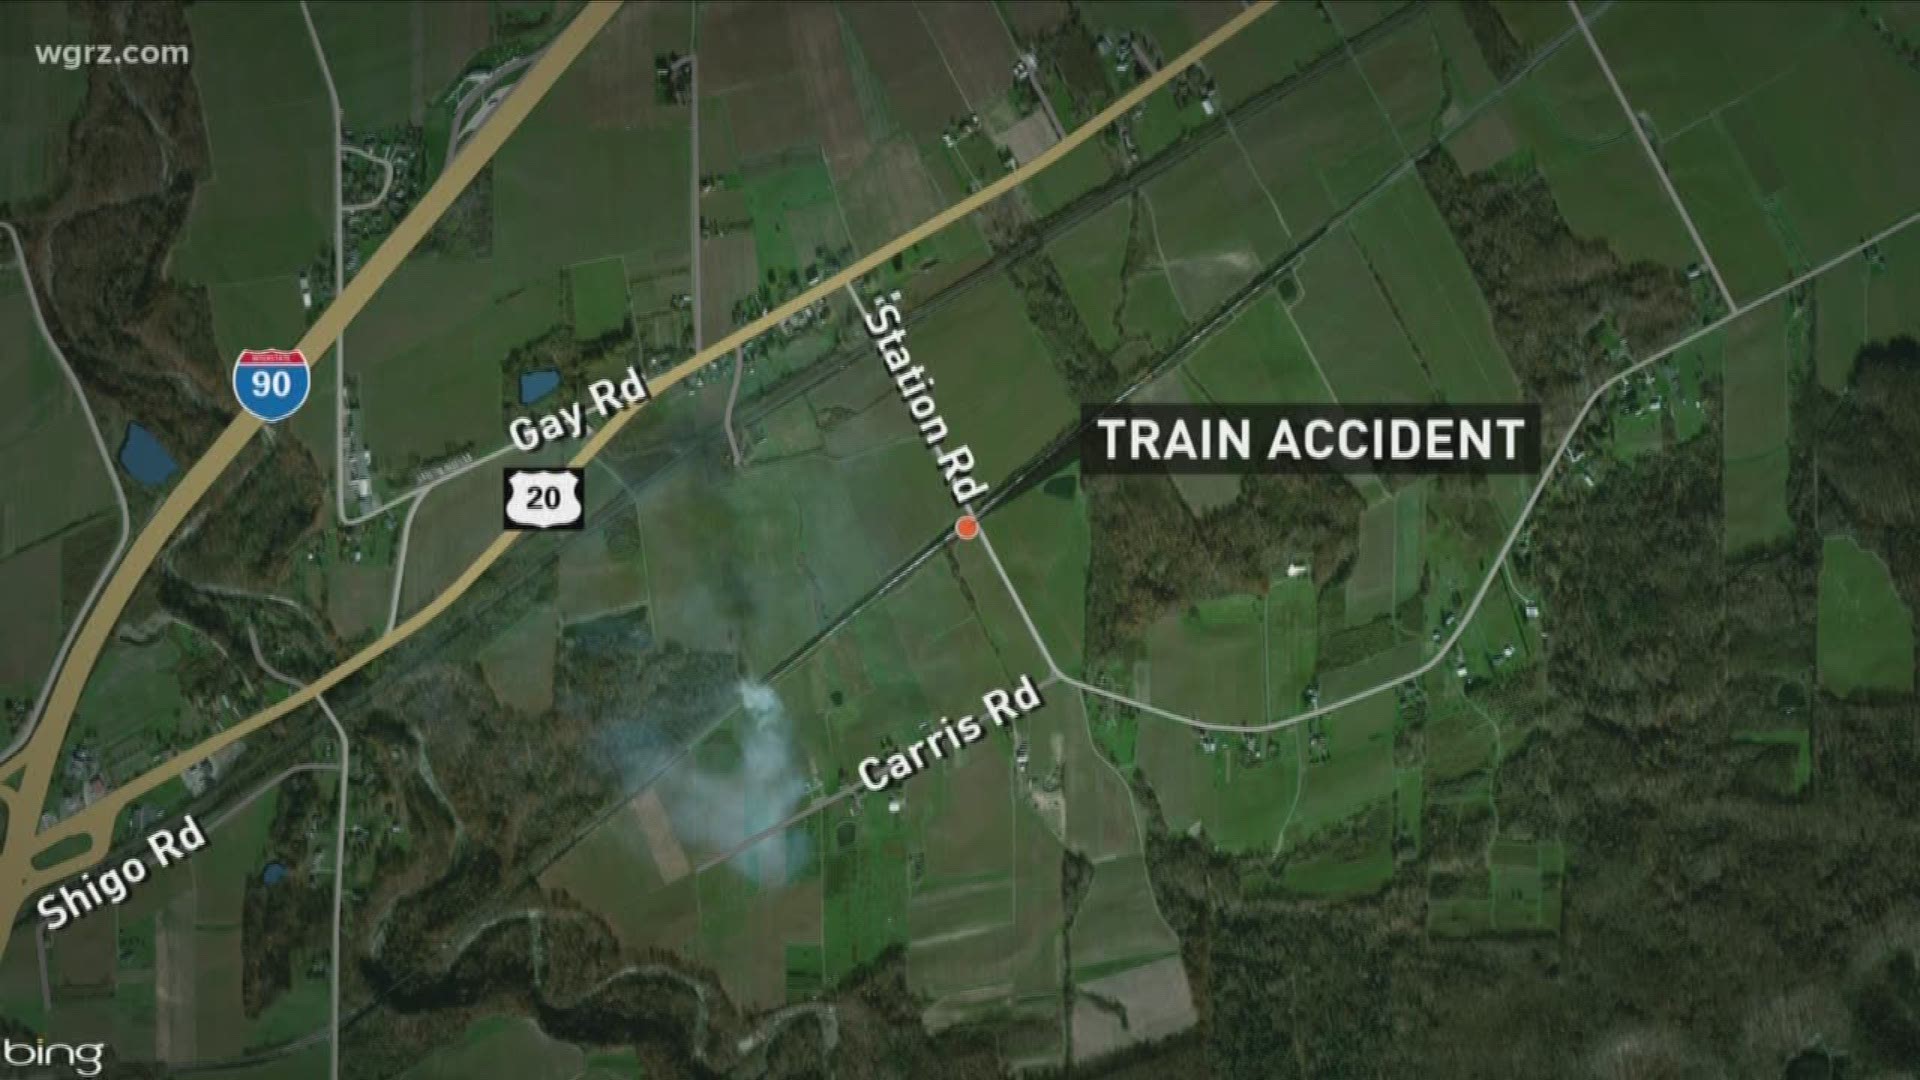 2 people charged in connection with train accident in Chautauqua County